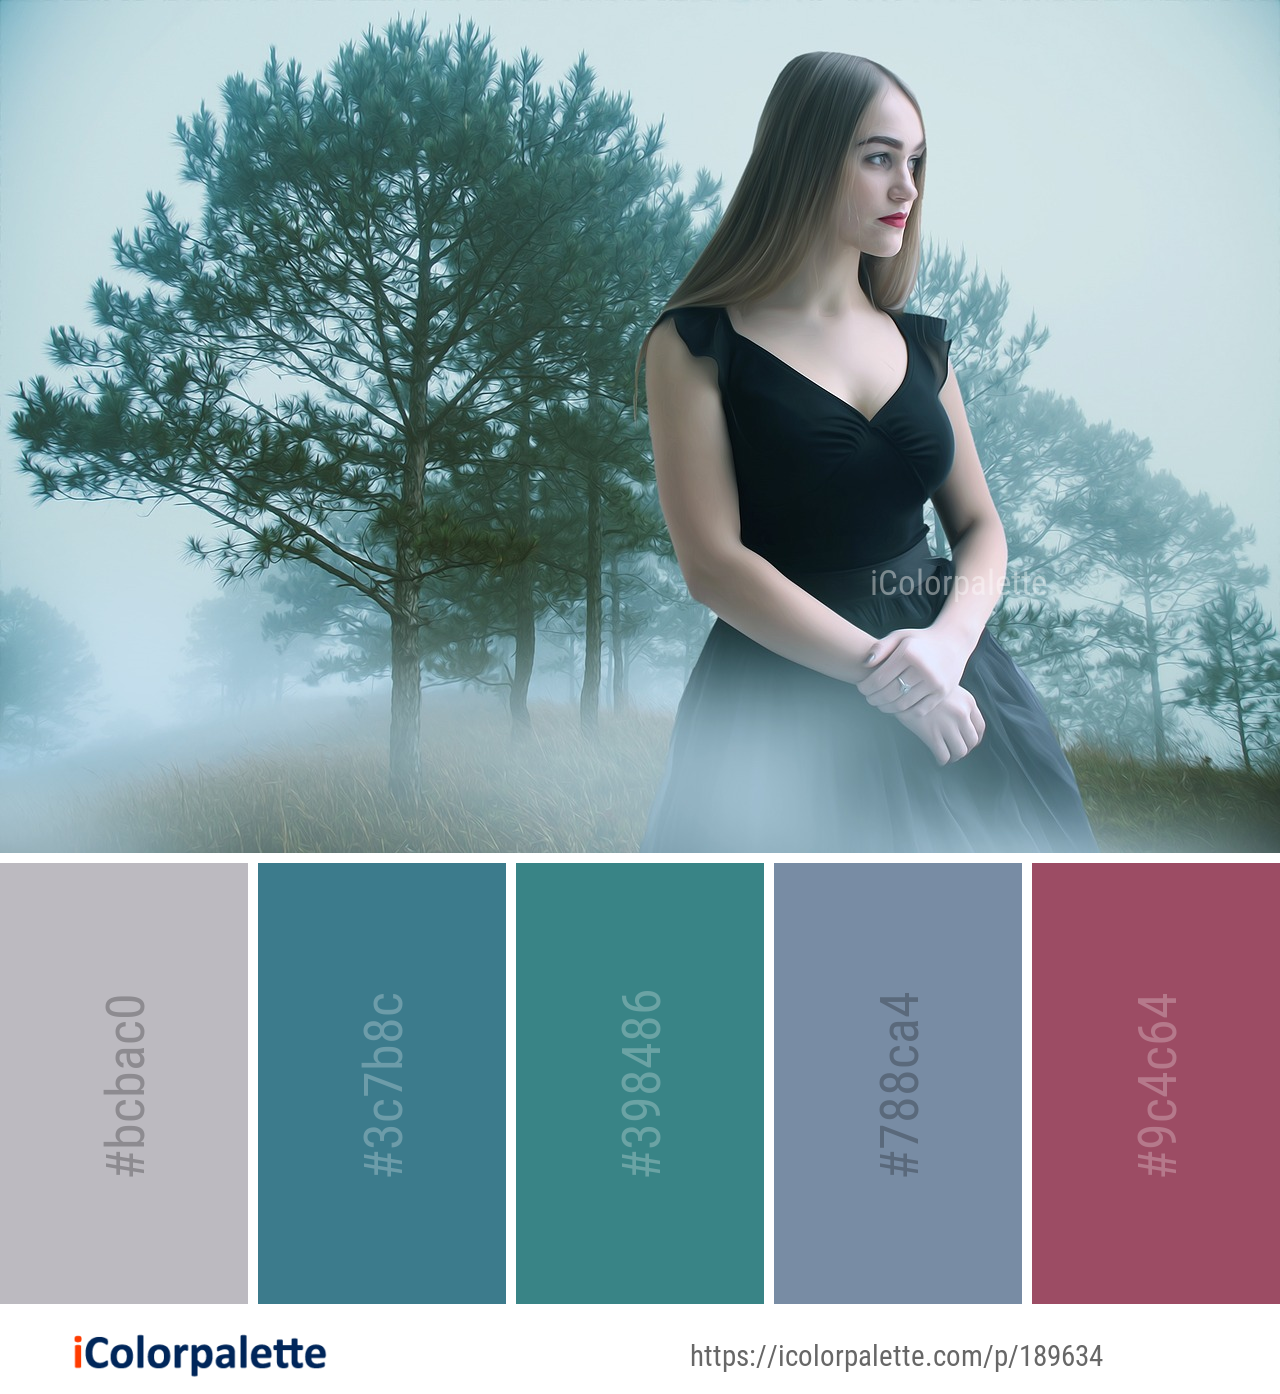 Color Palette Ideas from Photograph Beauty Girl Image | iColorpalette